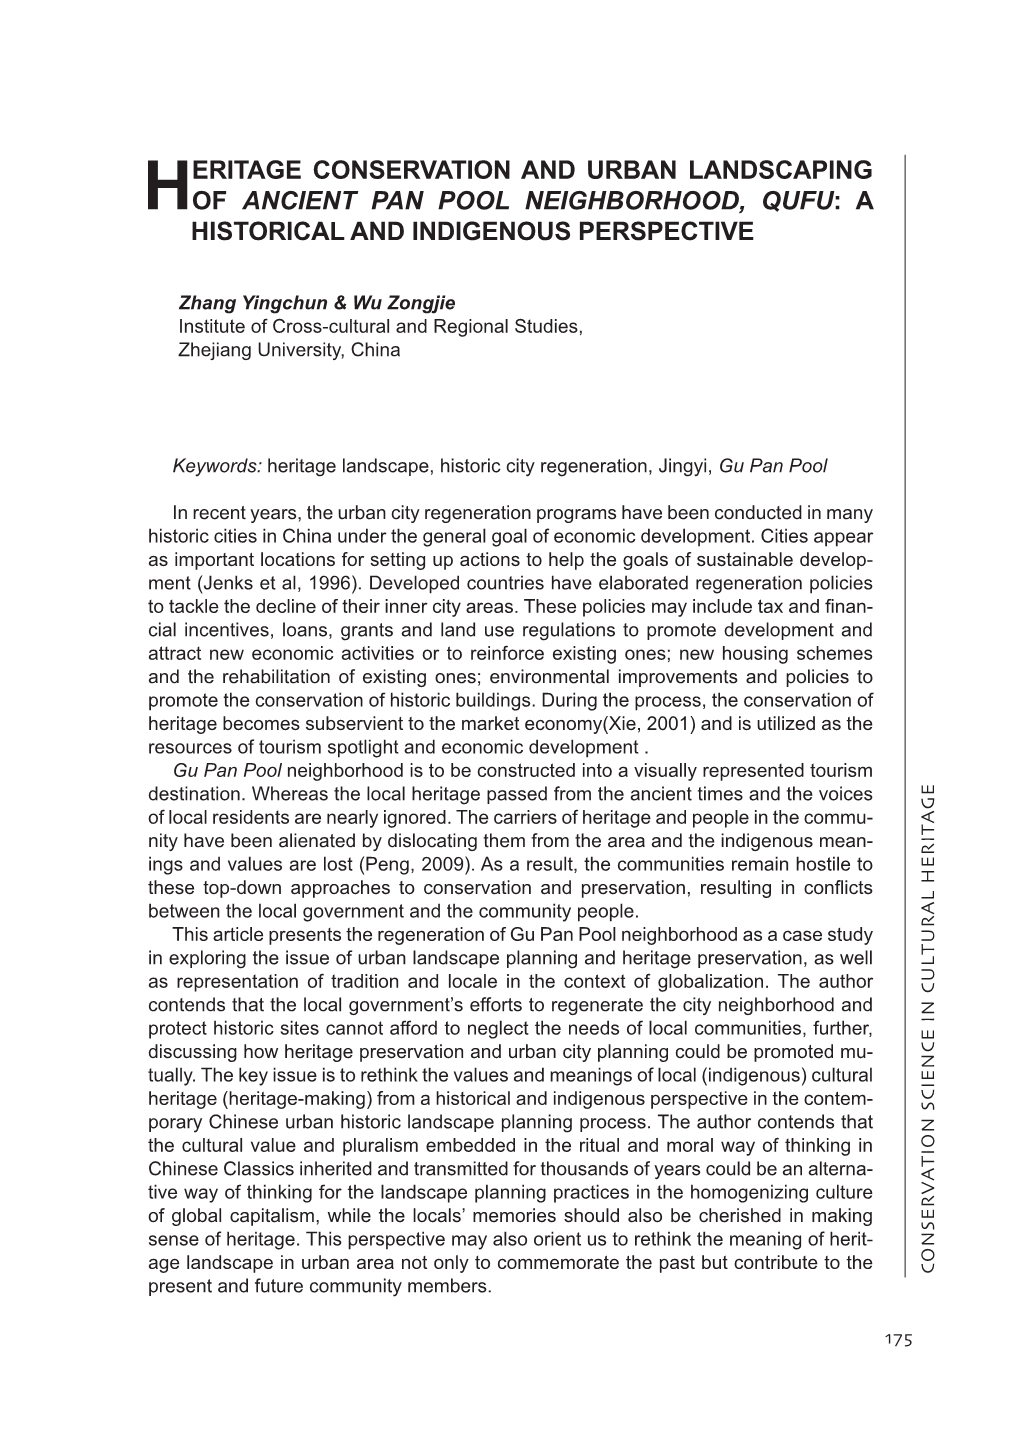 Heritage Conservation and Urban Landscaping of 6Th Century B.C.)